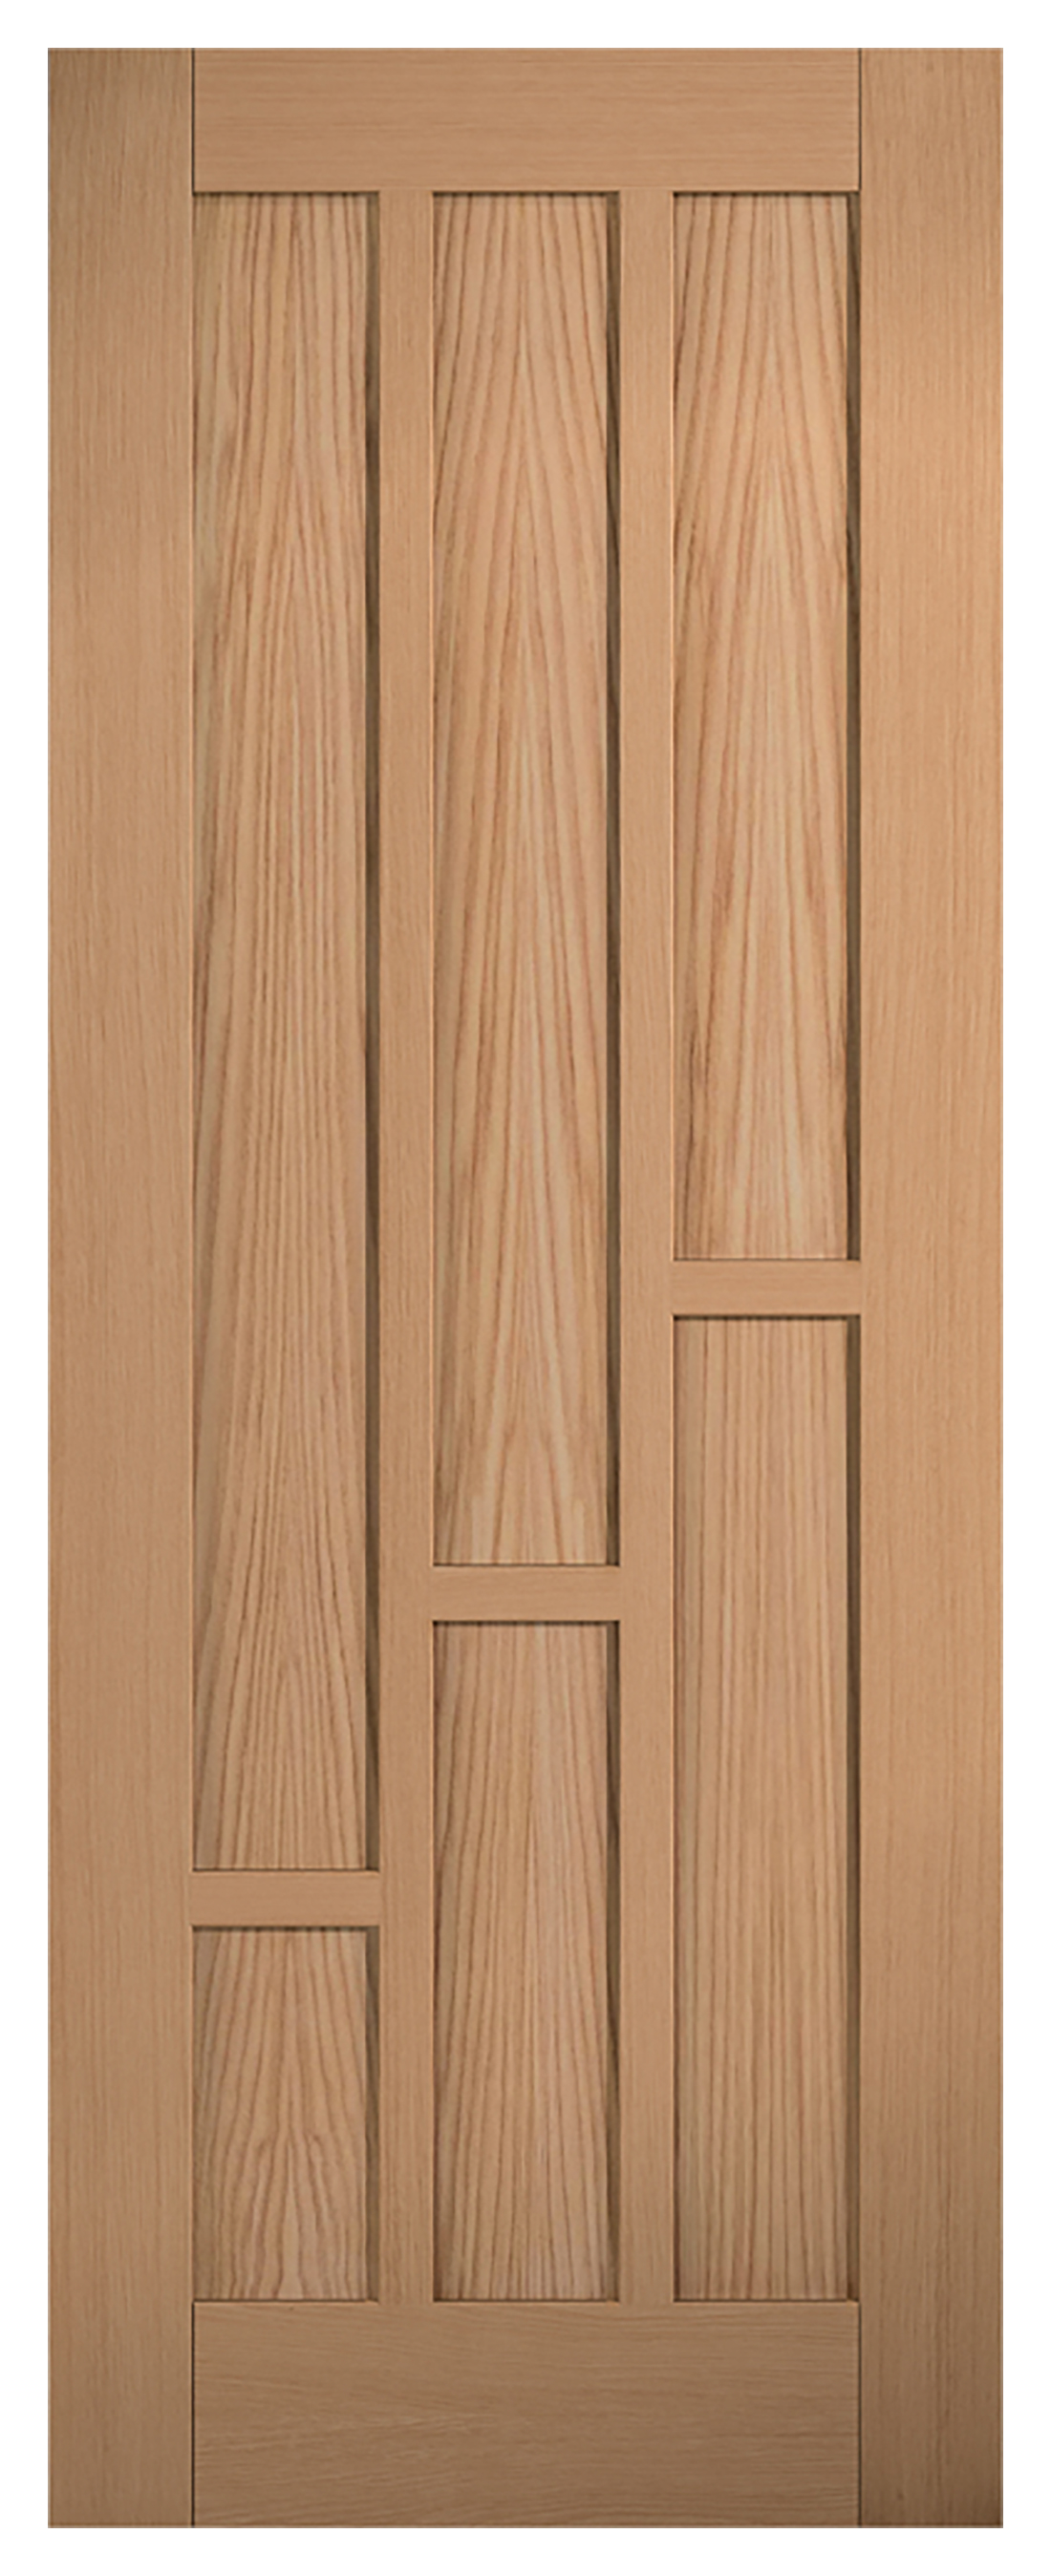 Image of LPD Internal Coventry 6 Panel Unfinished Oak FD30 Fire Door - 762 x 1981mm